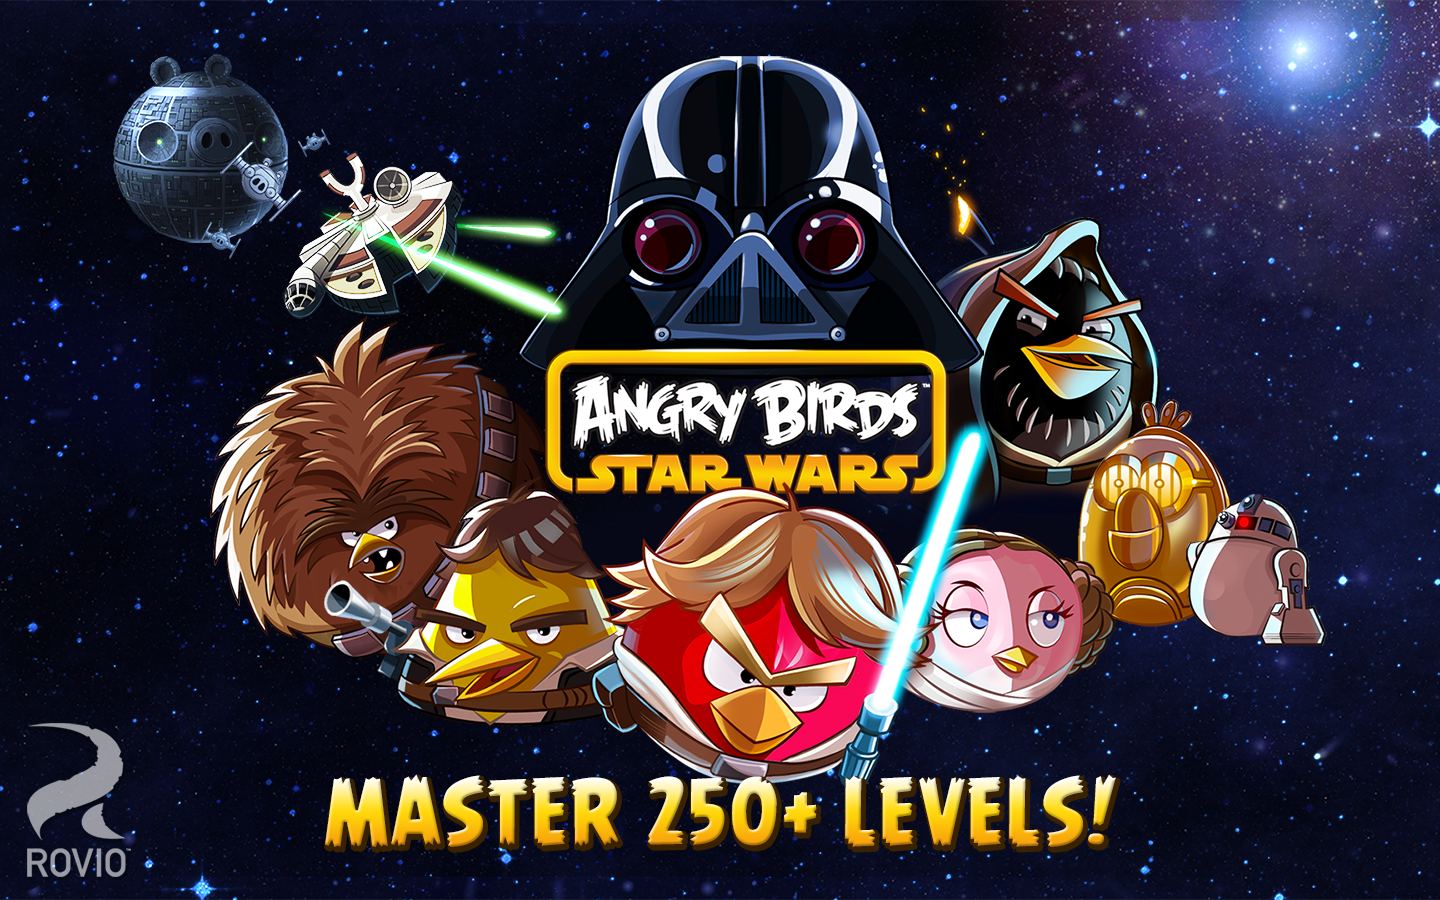 Angry Birds: Star Wars #20